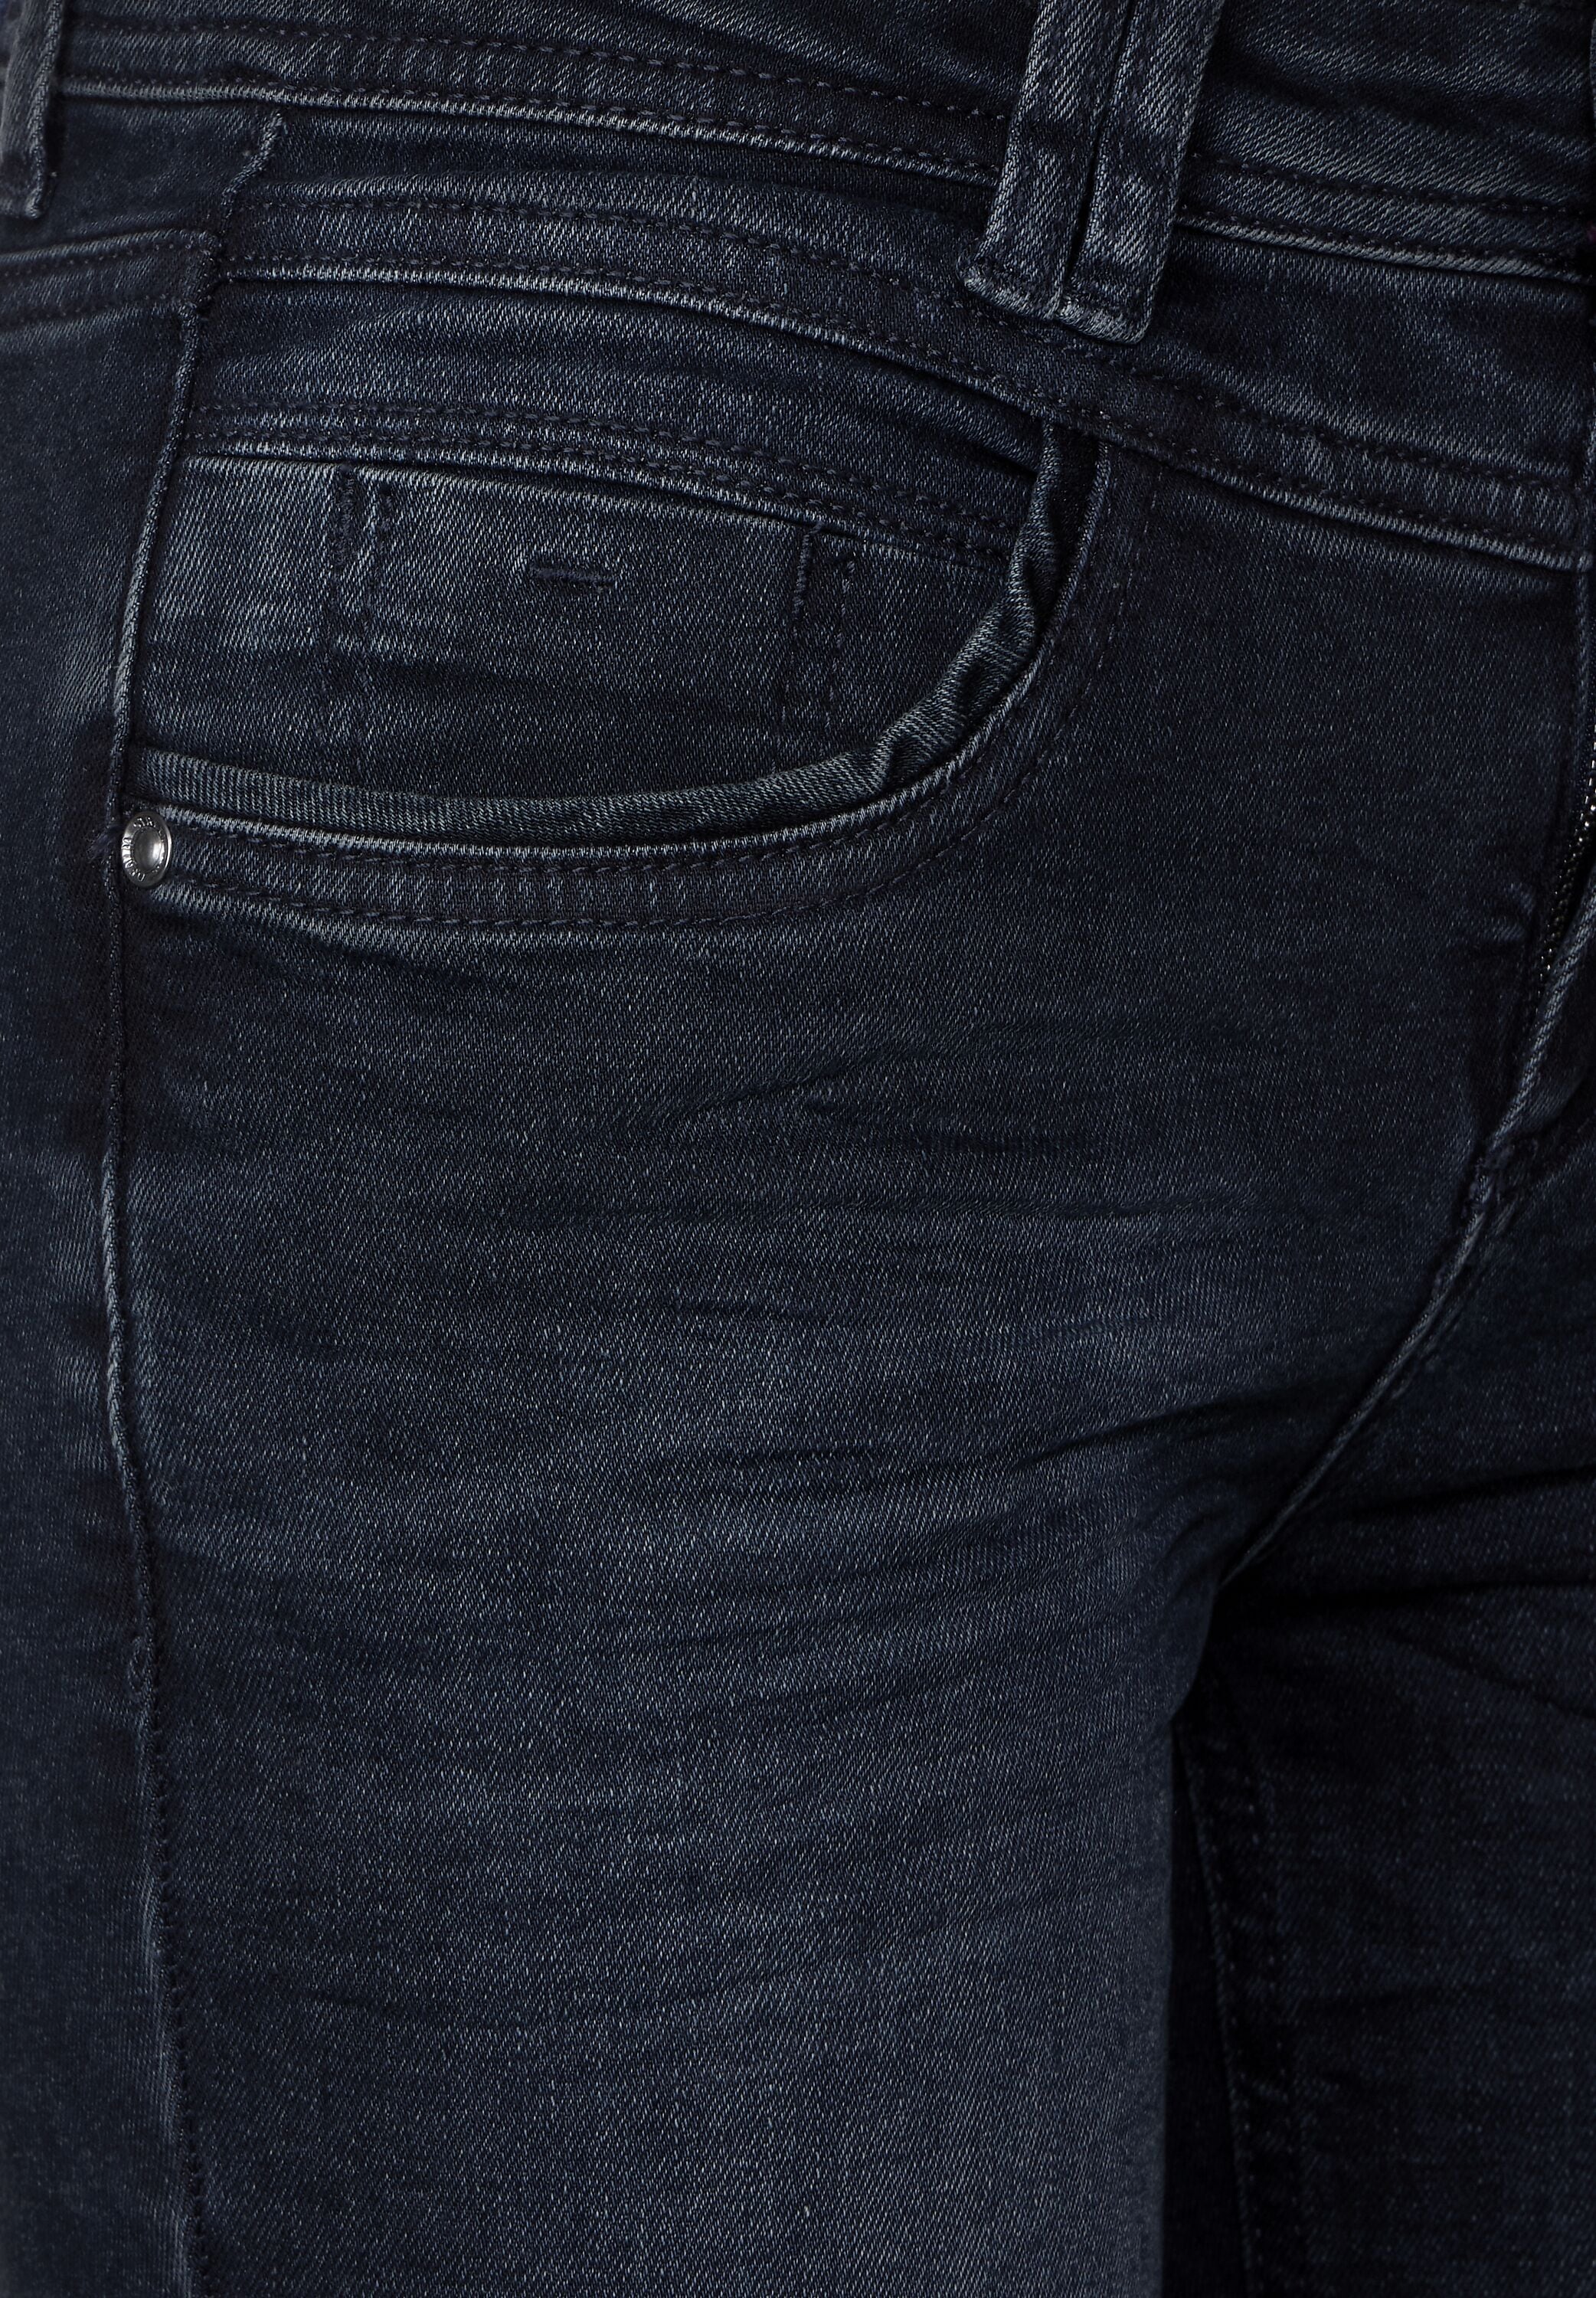 STREET ONE Slim-fit-Jeans, in dunkler Waschung